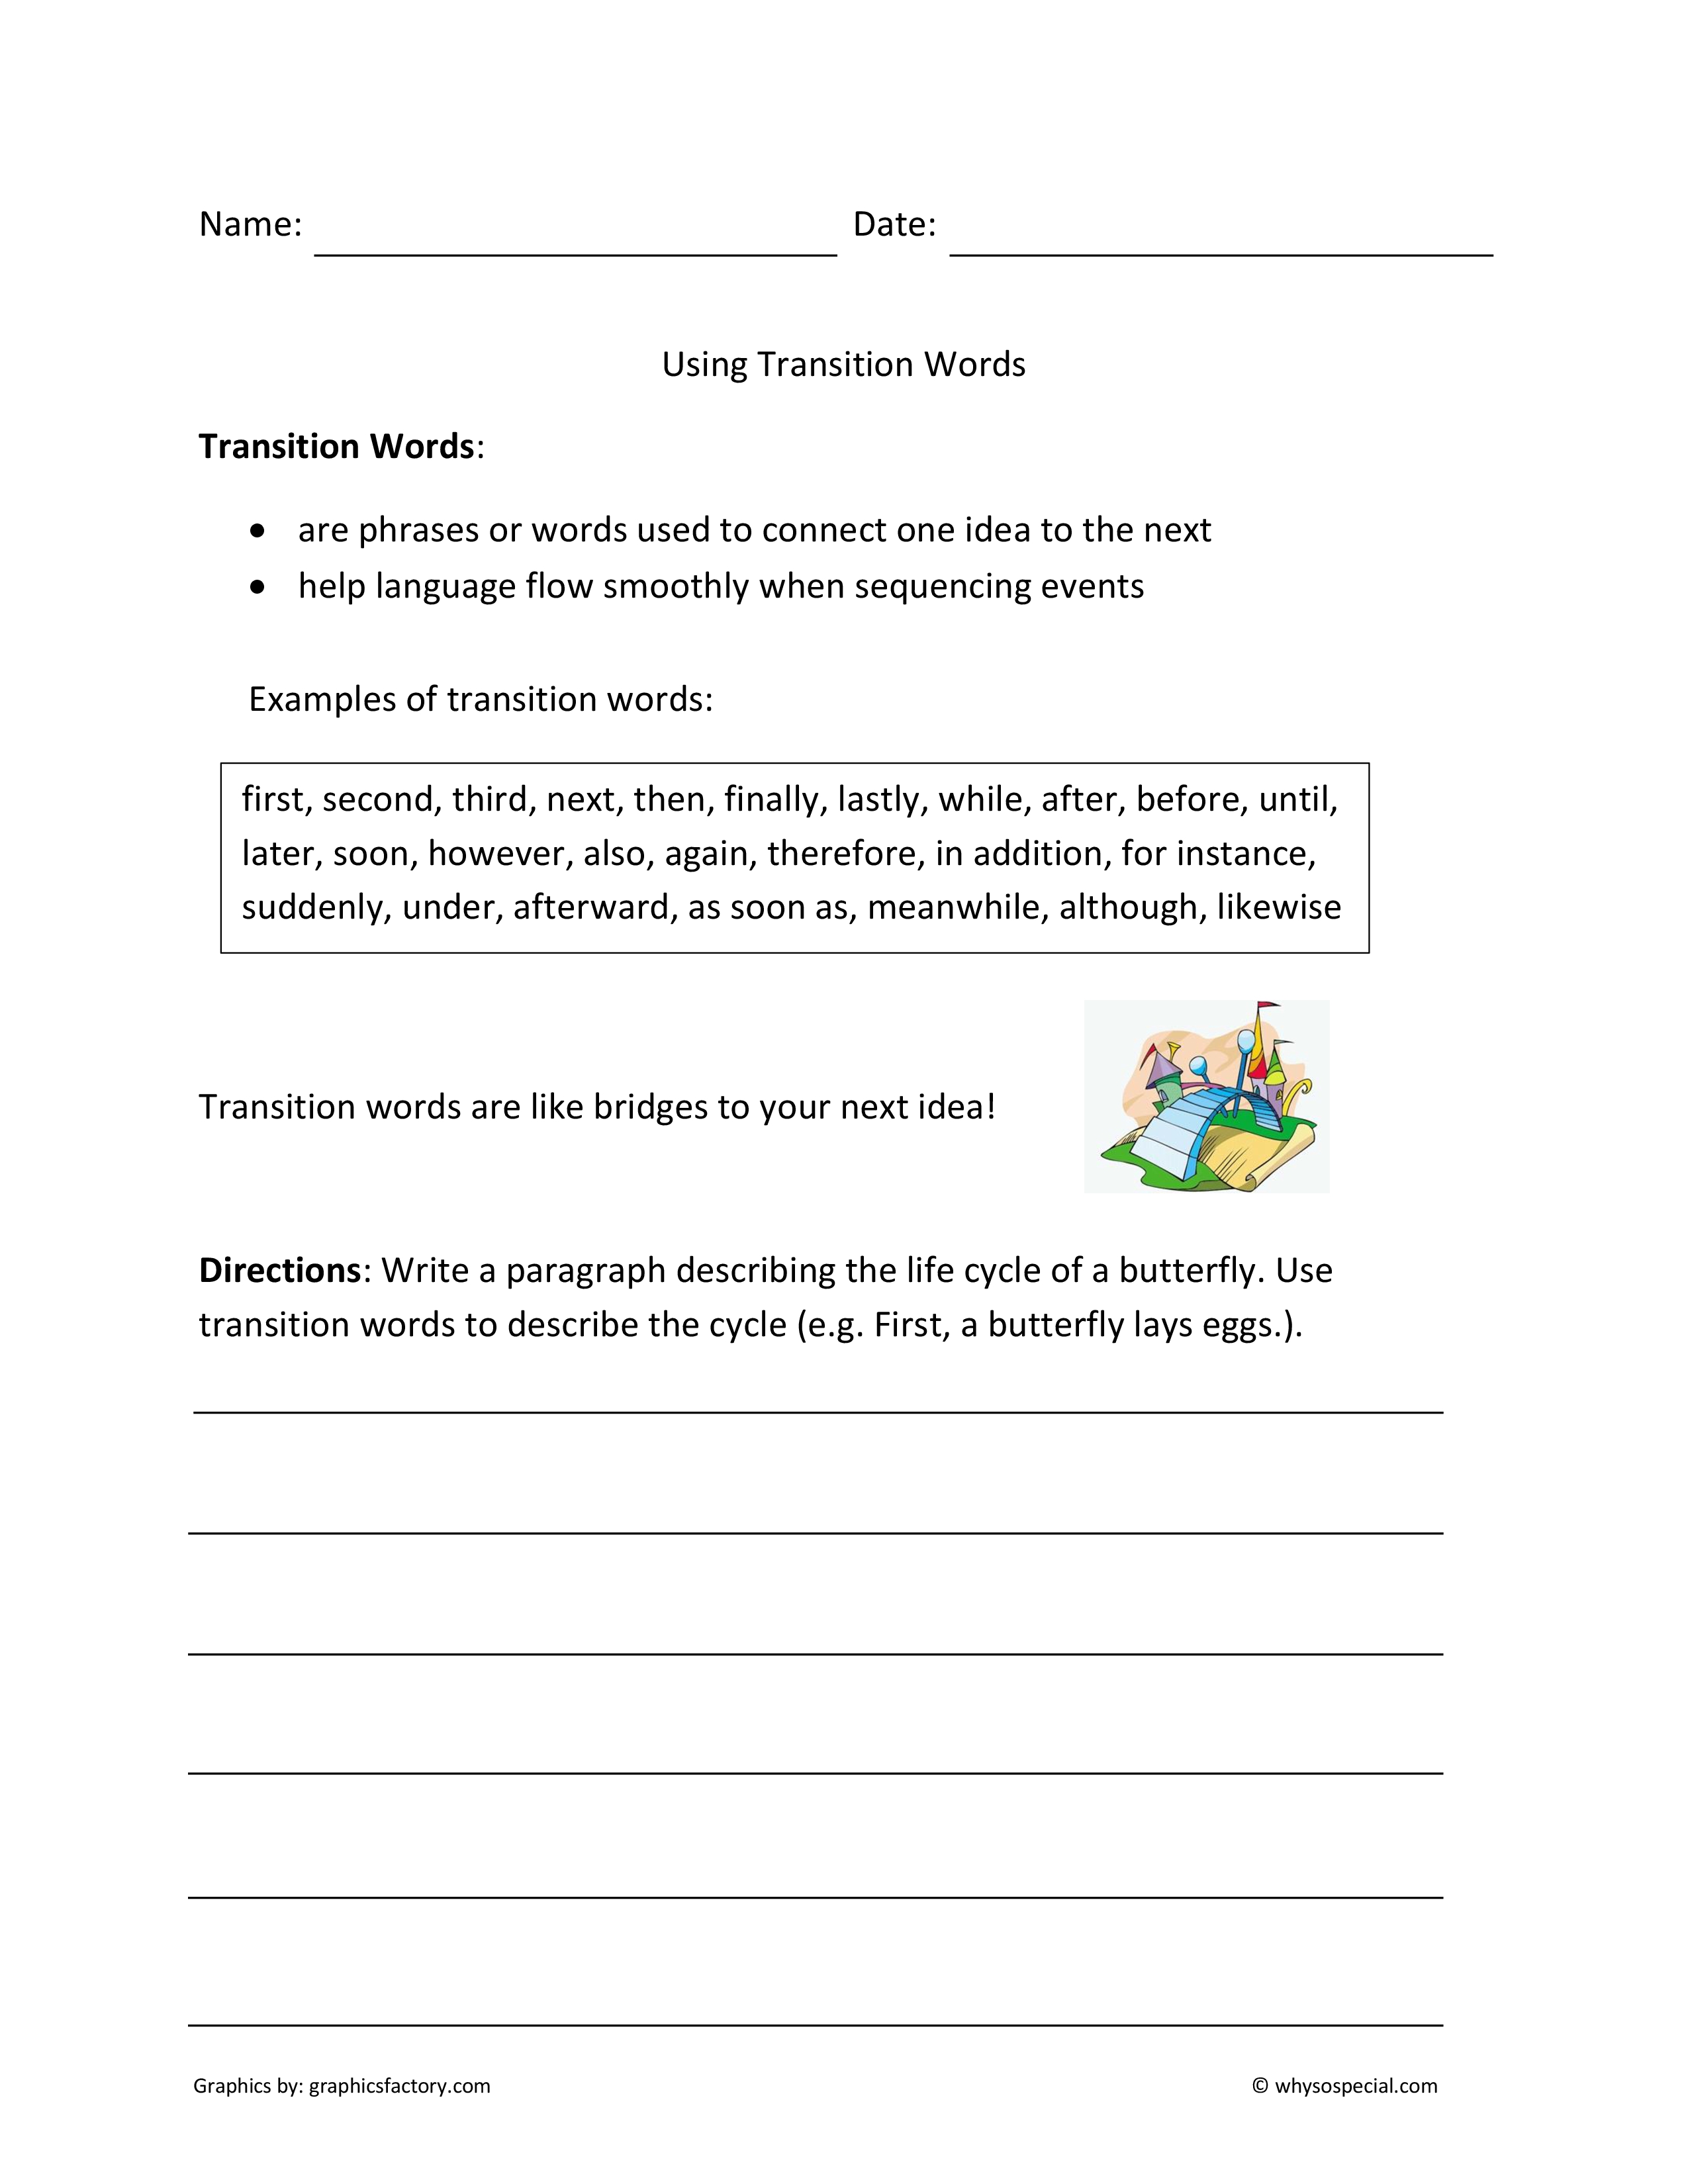 16-best-images-of-writing-transition-words-worksheet-transition-words